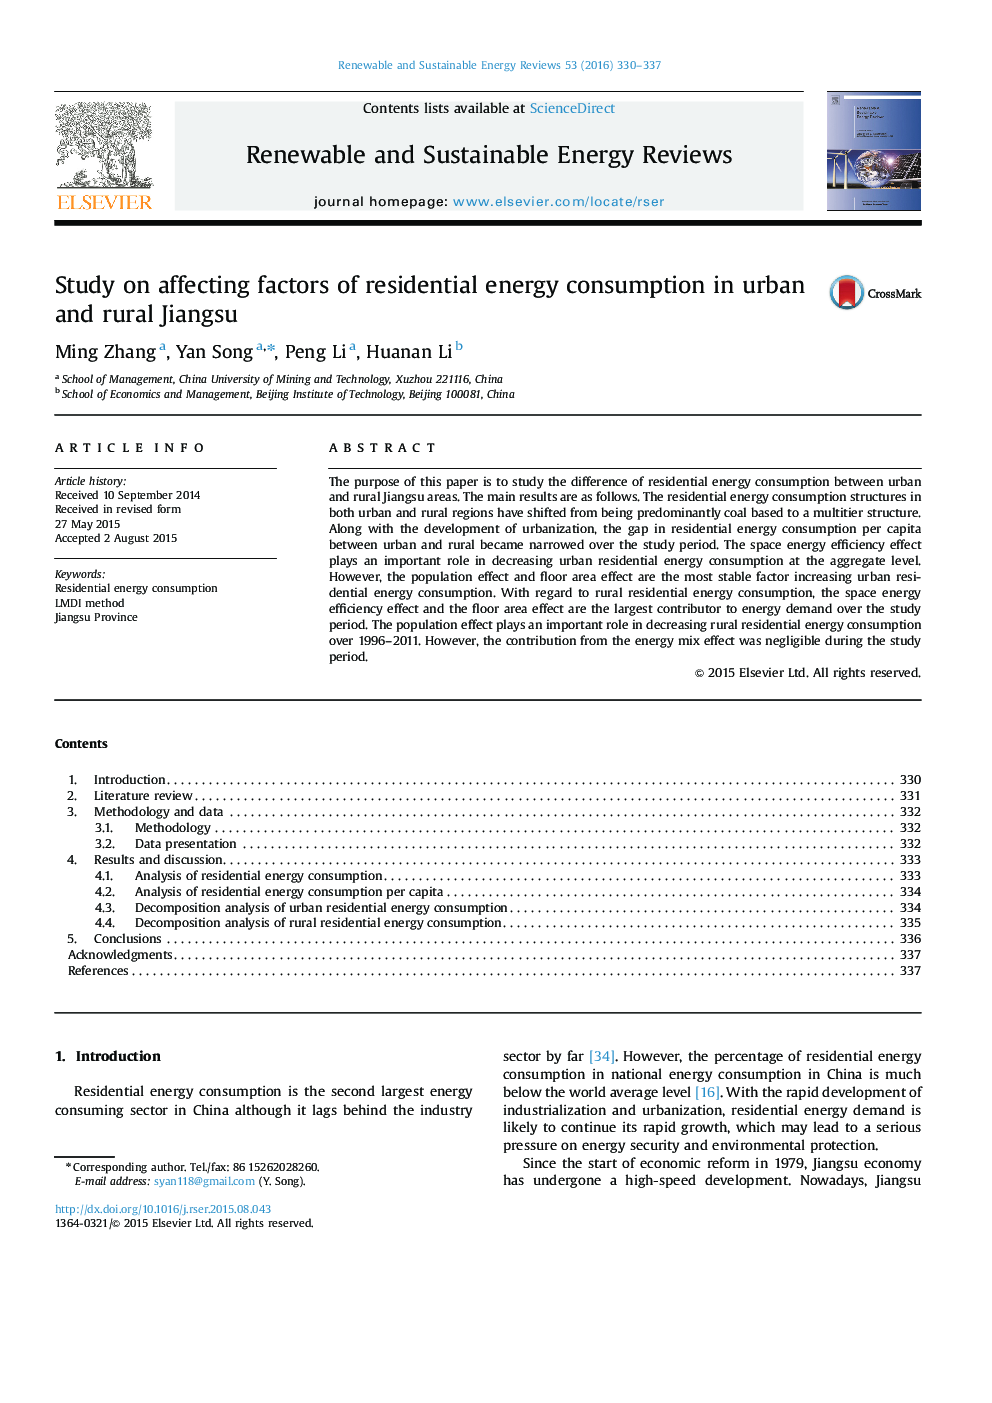 Study on affecting factors of residential energy consumption in urban and rural Jiangsu